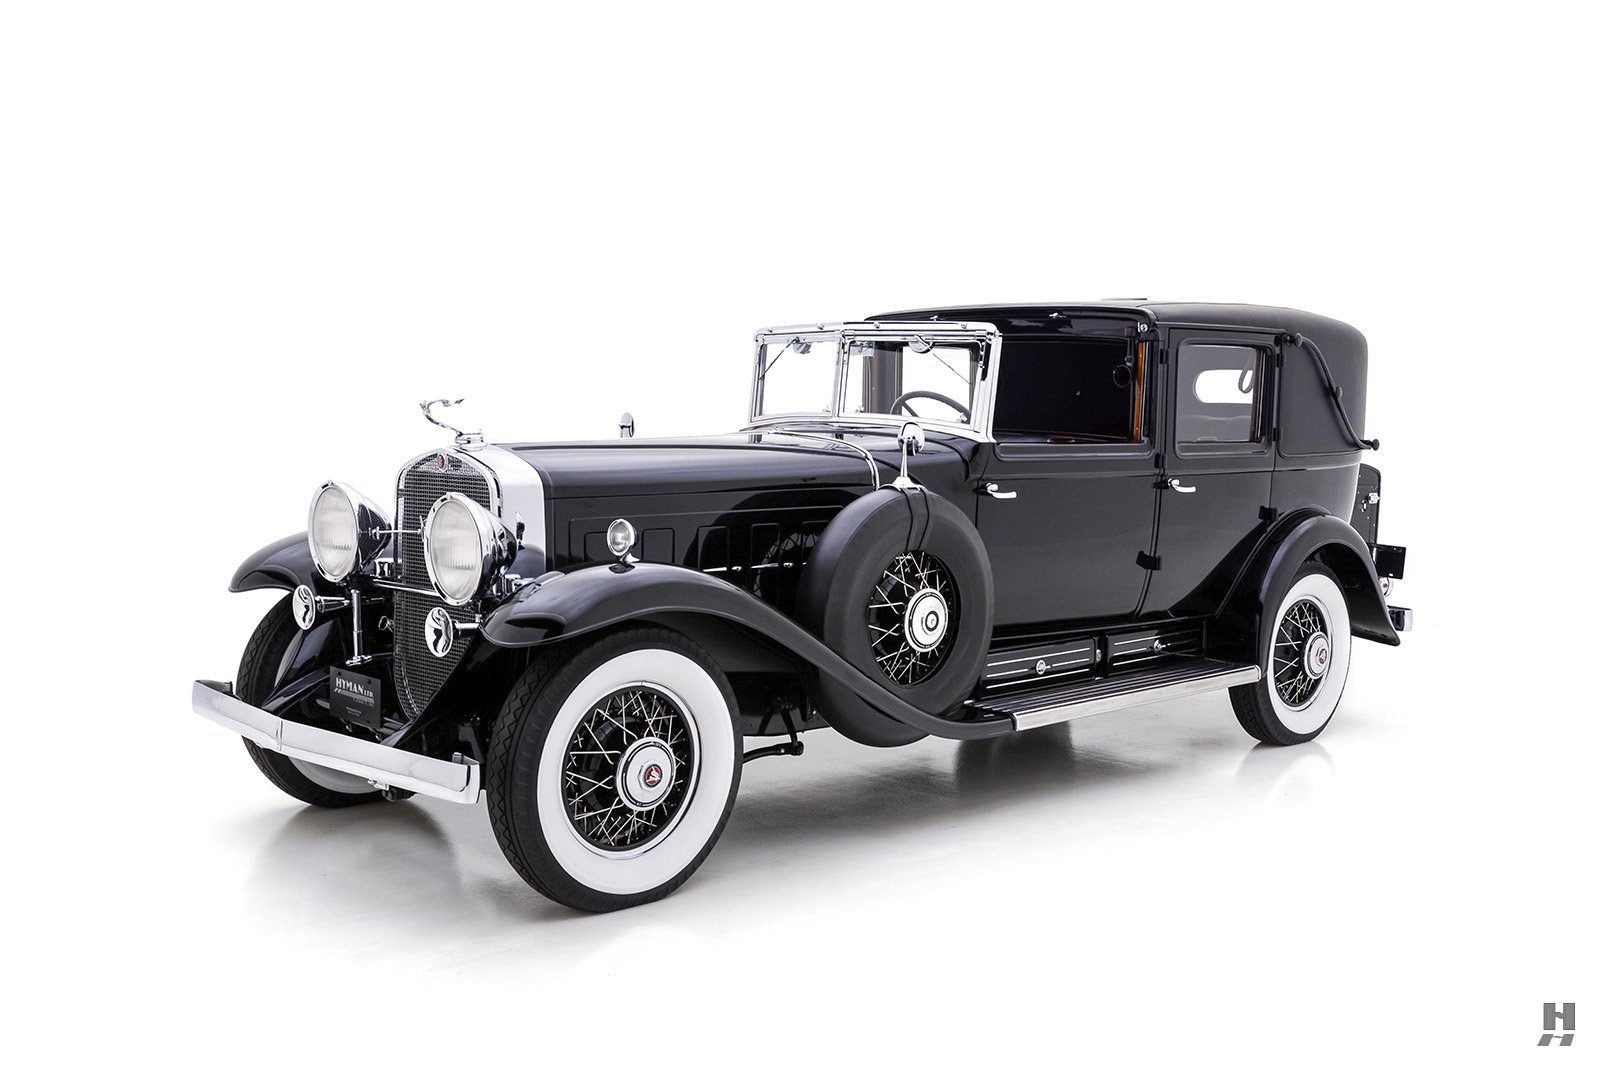 1930 Cadillac V16 For Sale | Vintage Driving Machines